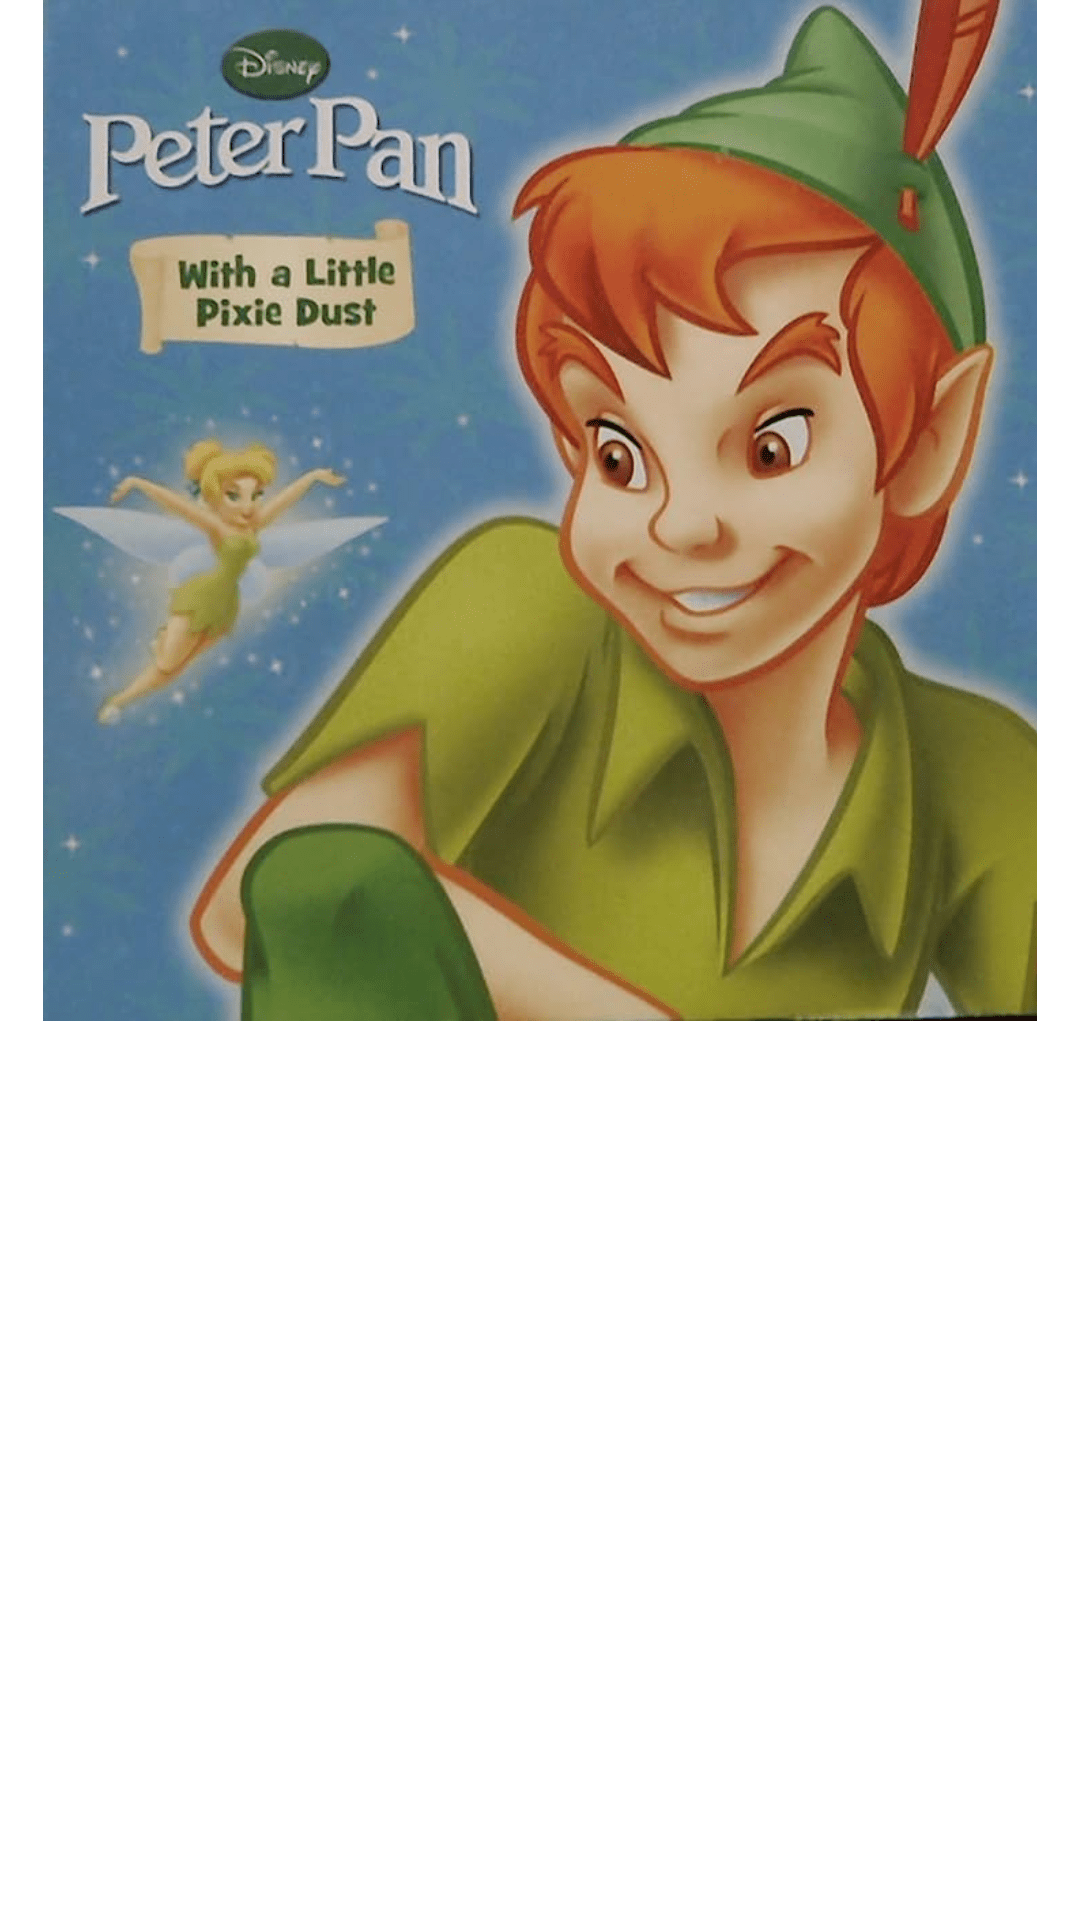 Disney Peter Pan: With a Little Pixie Dust